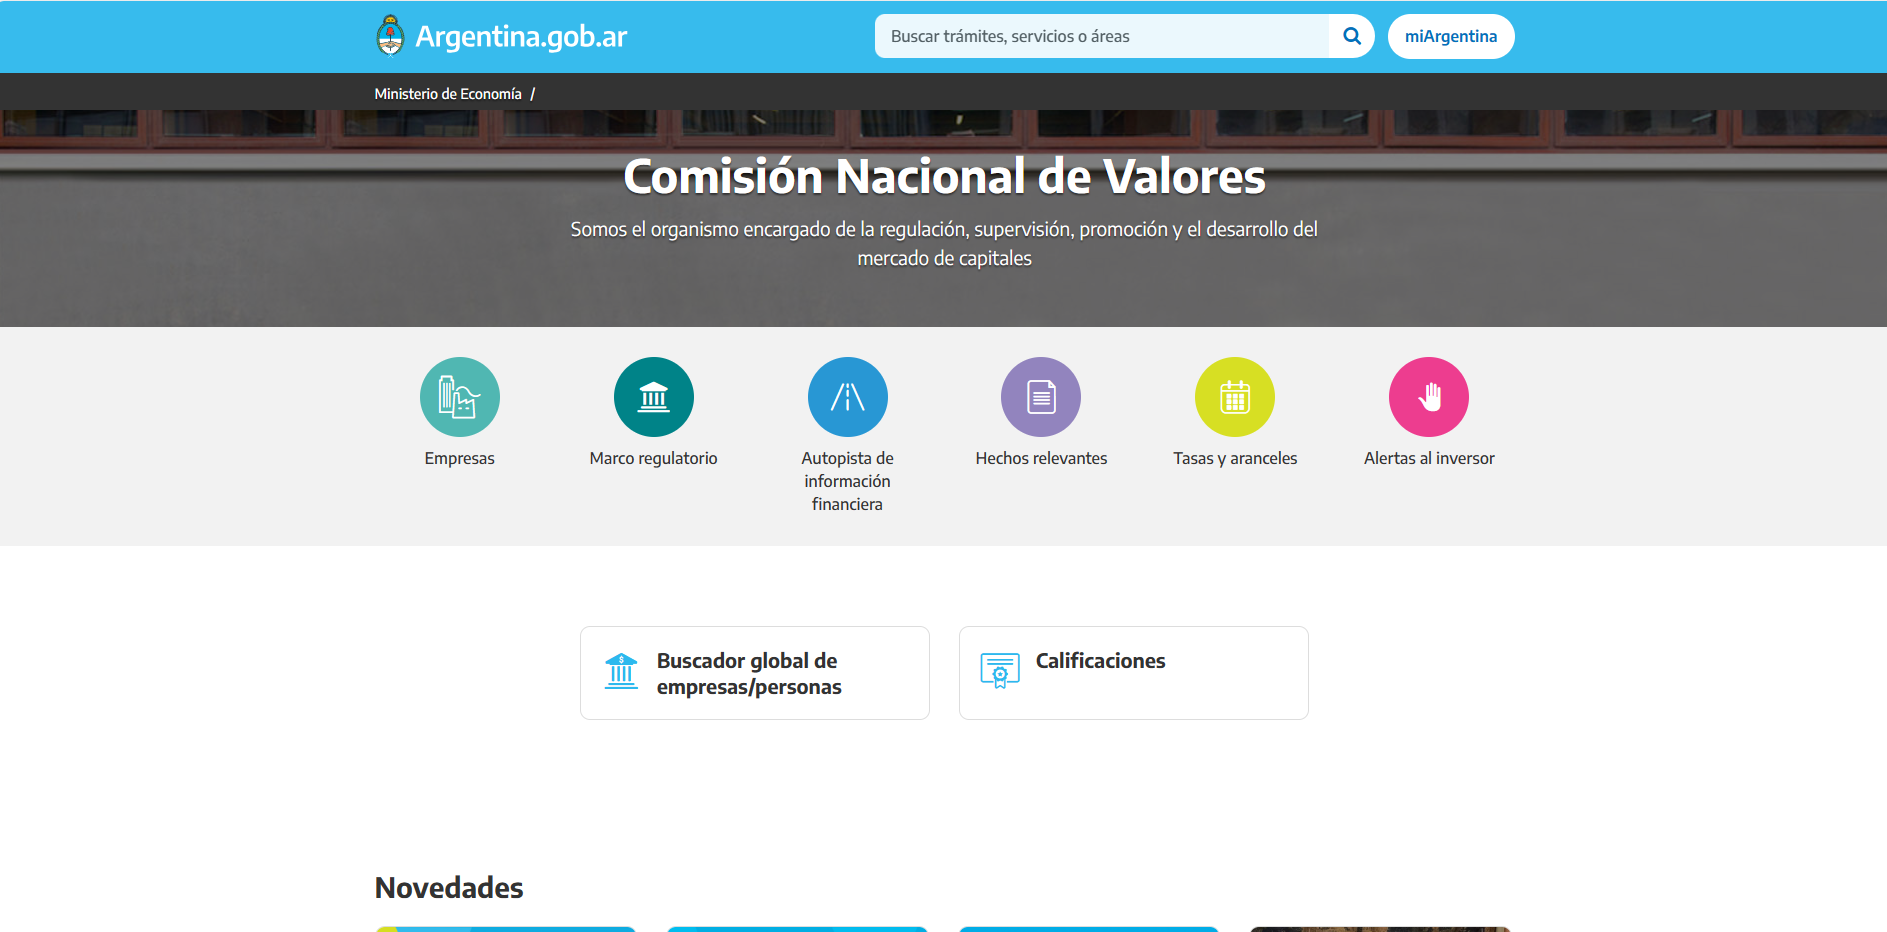 official portal of the Argentine state